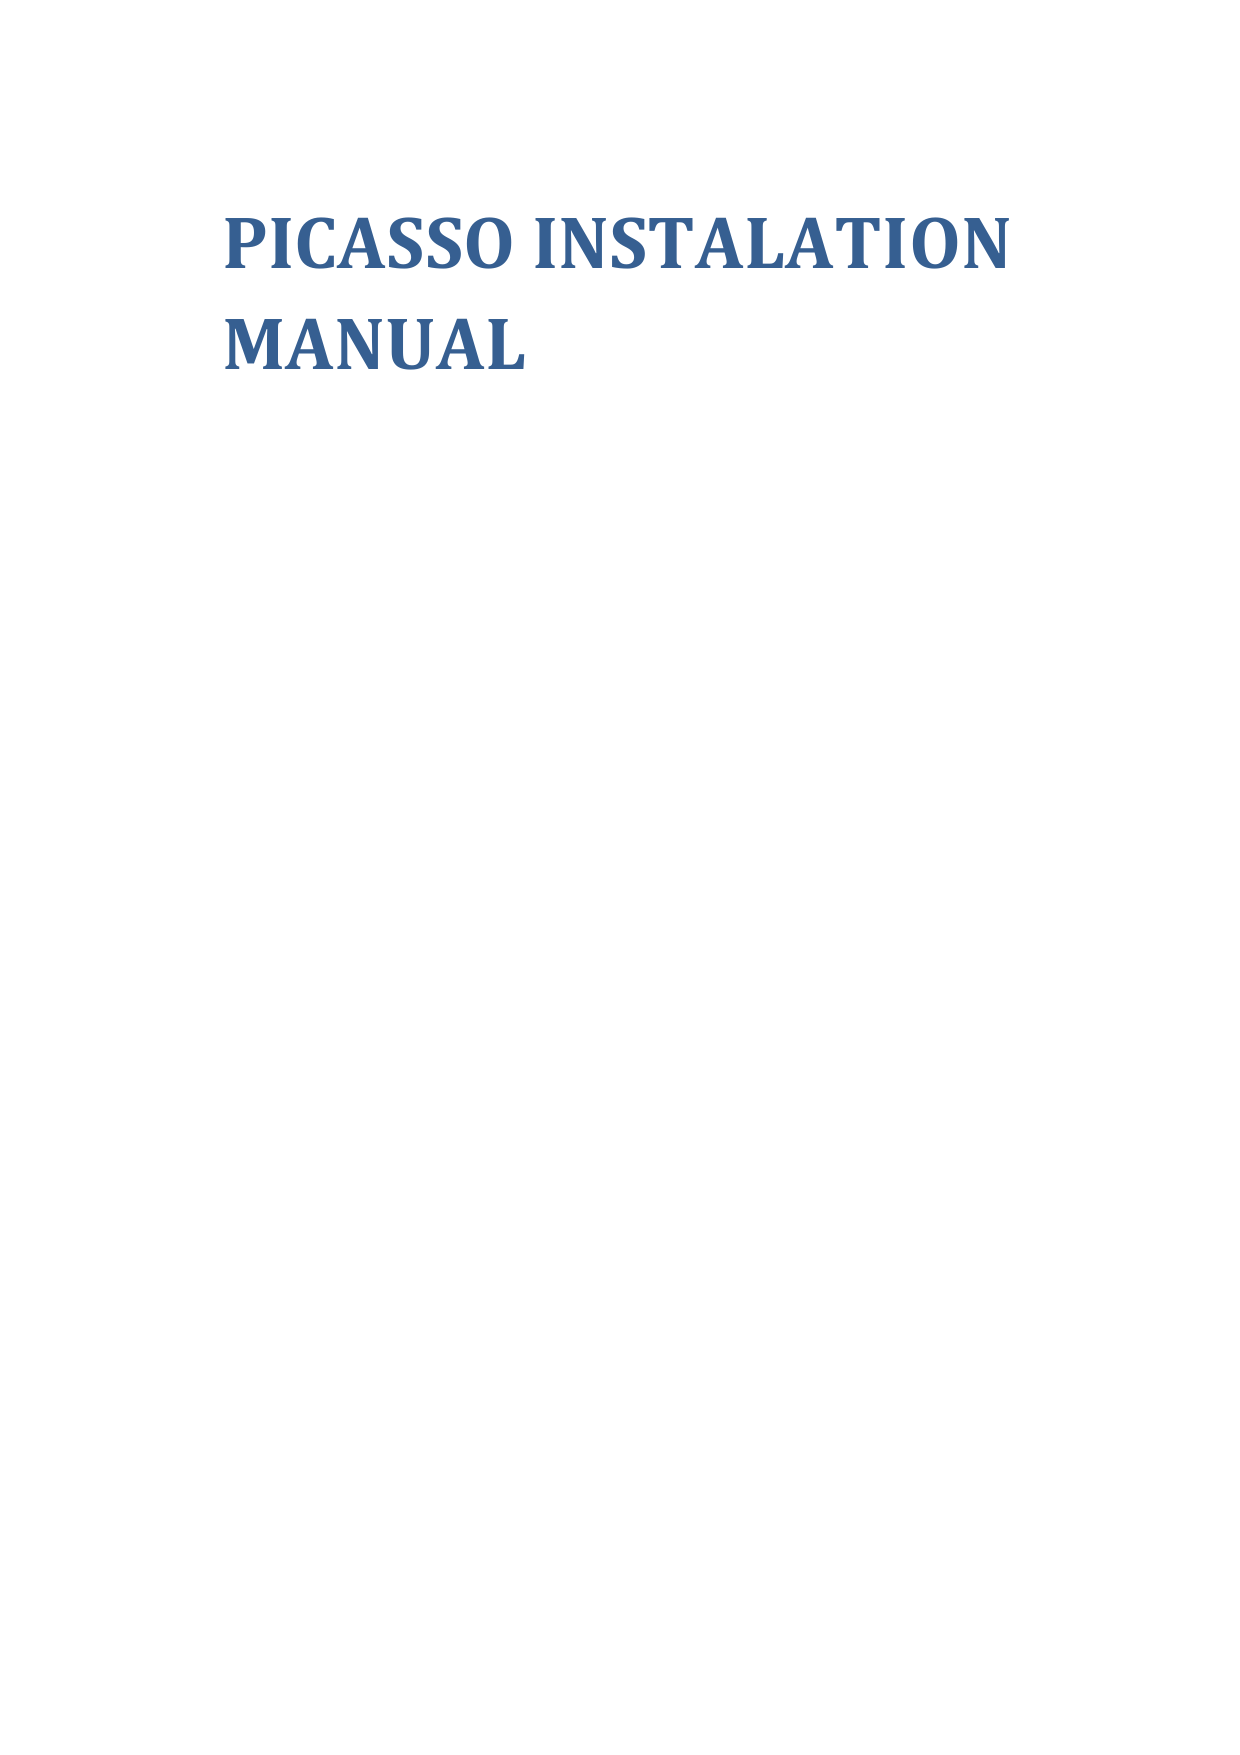 PICASSO INSTALATION MANUAL 